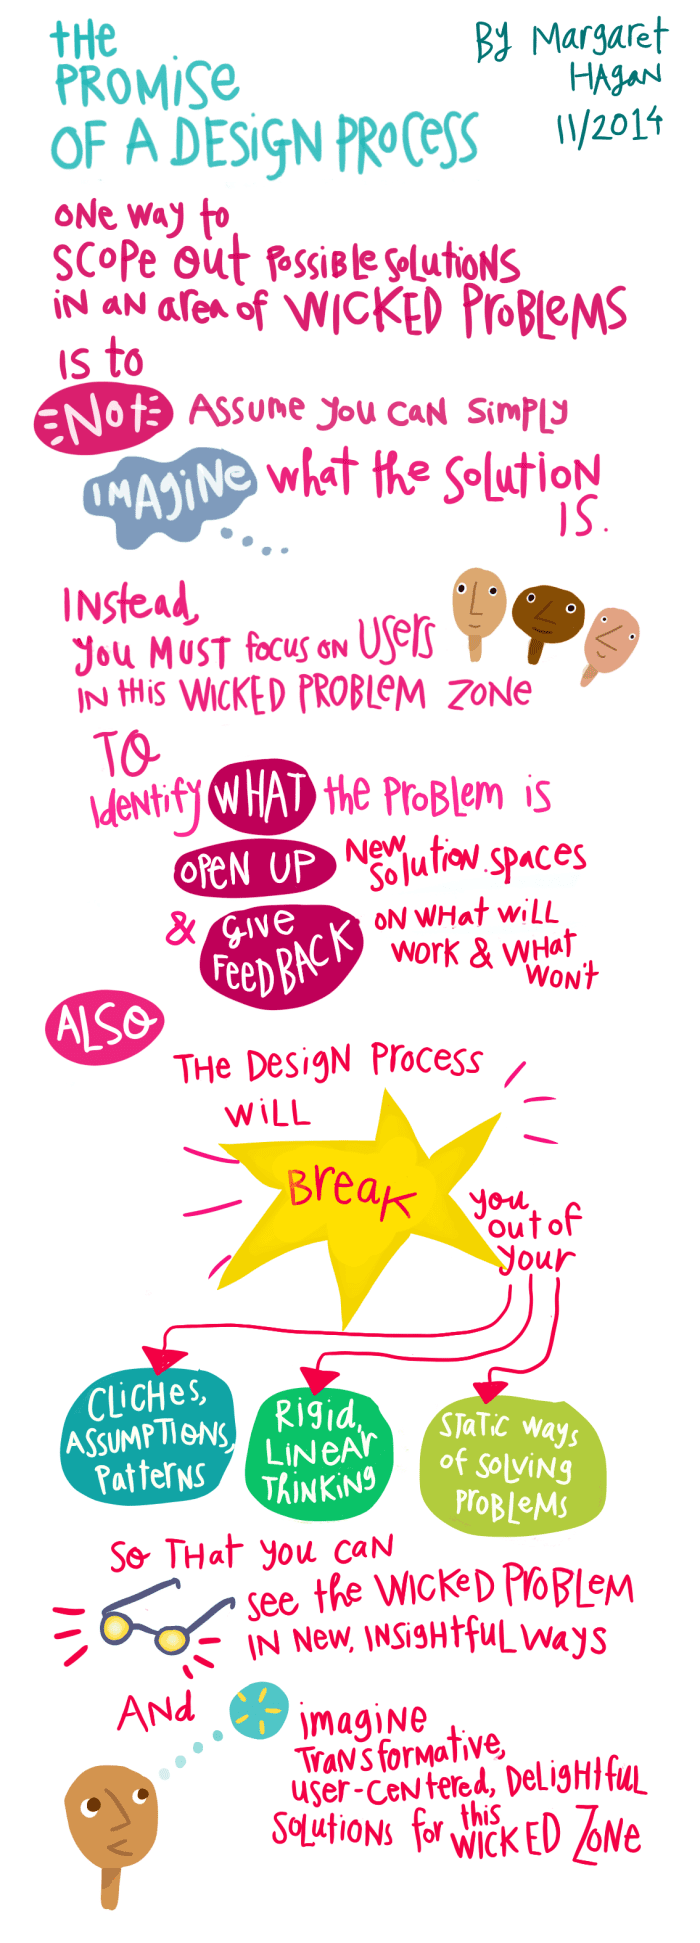 The Promise of a Design Process - by Margaret Hagan - design thinking